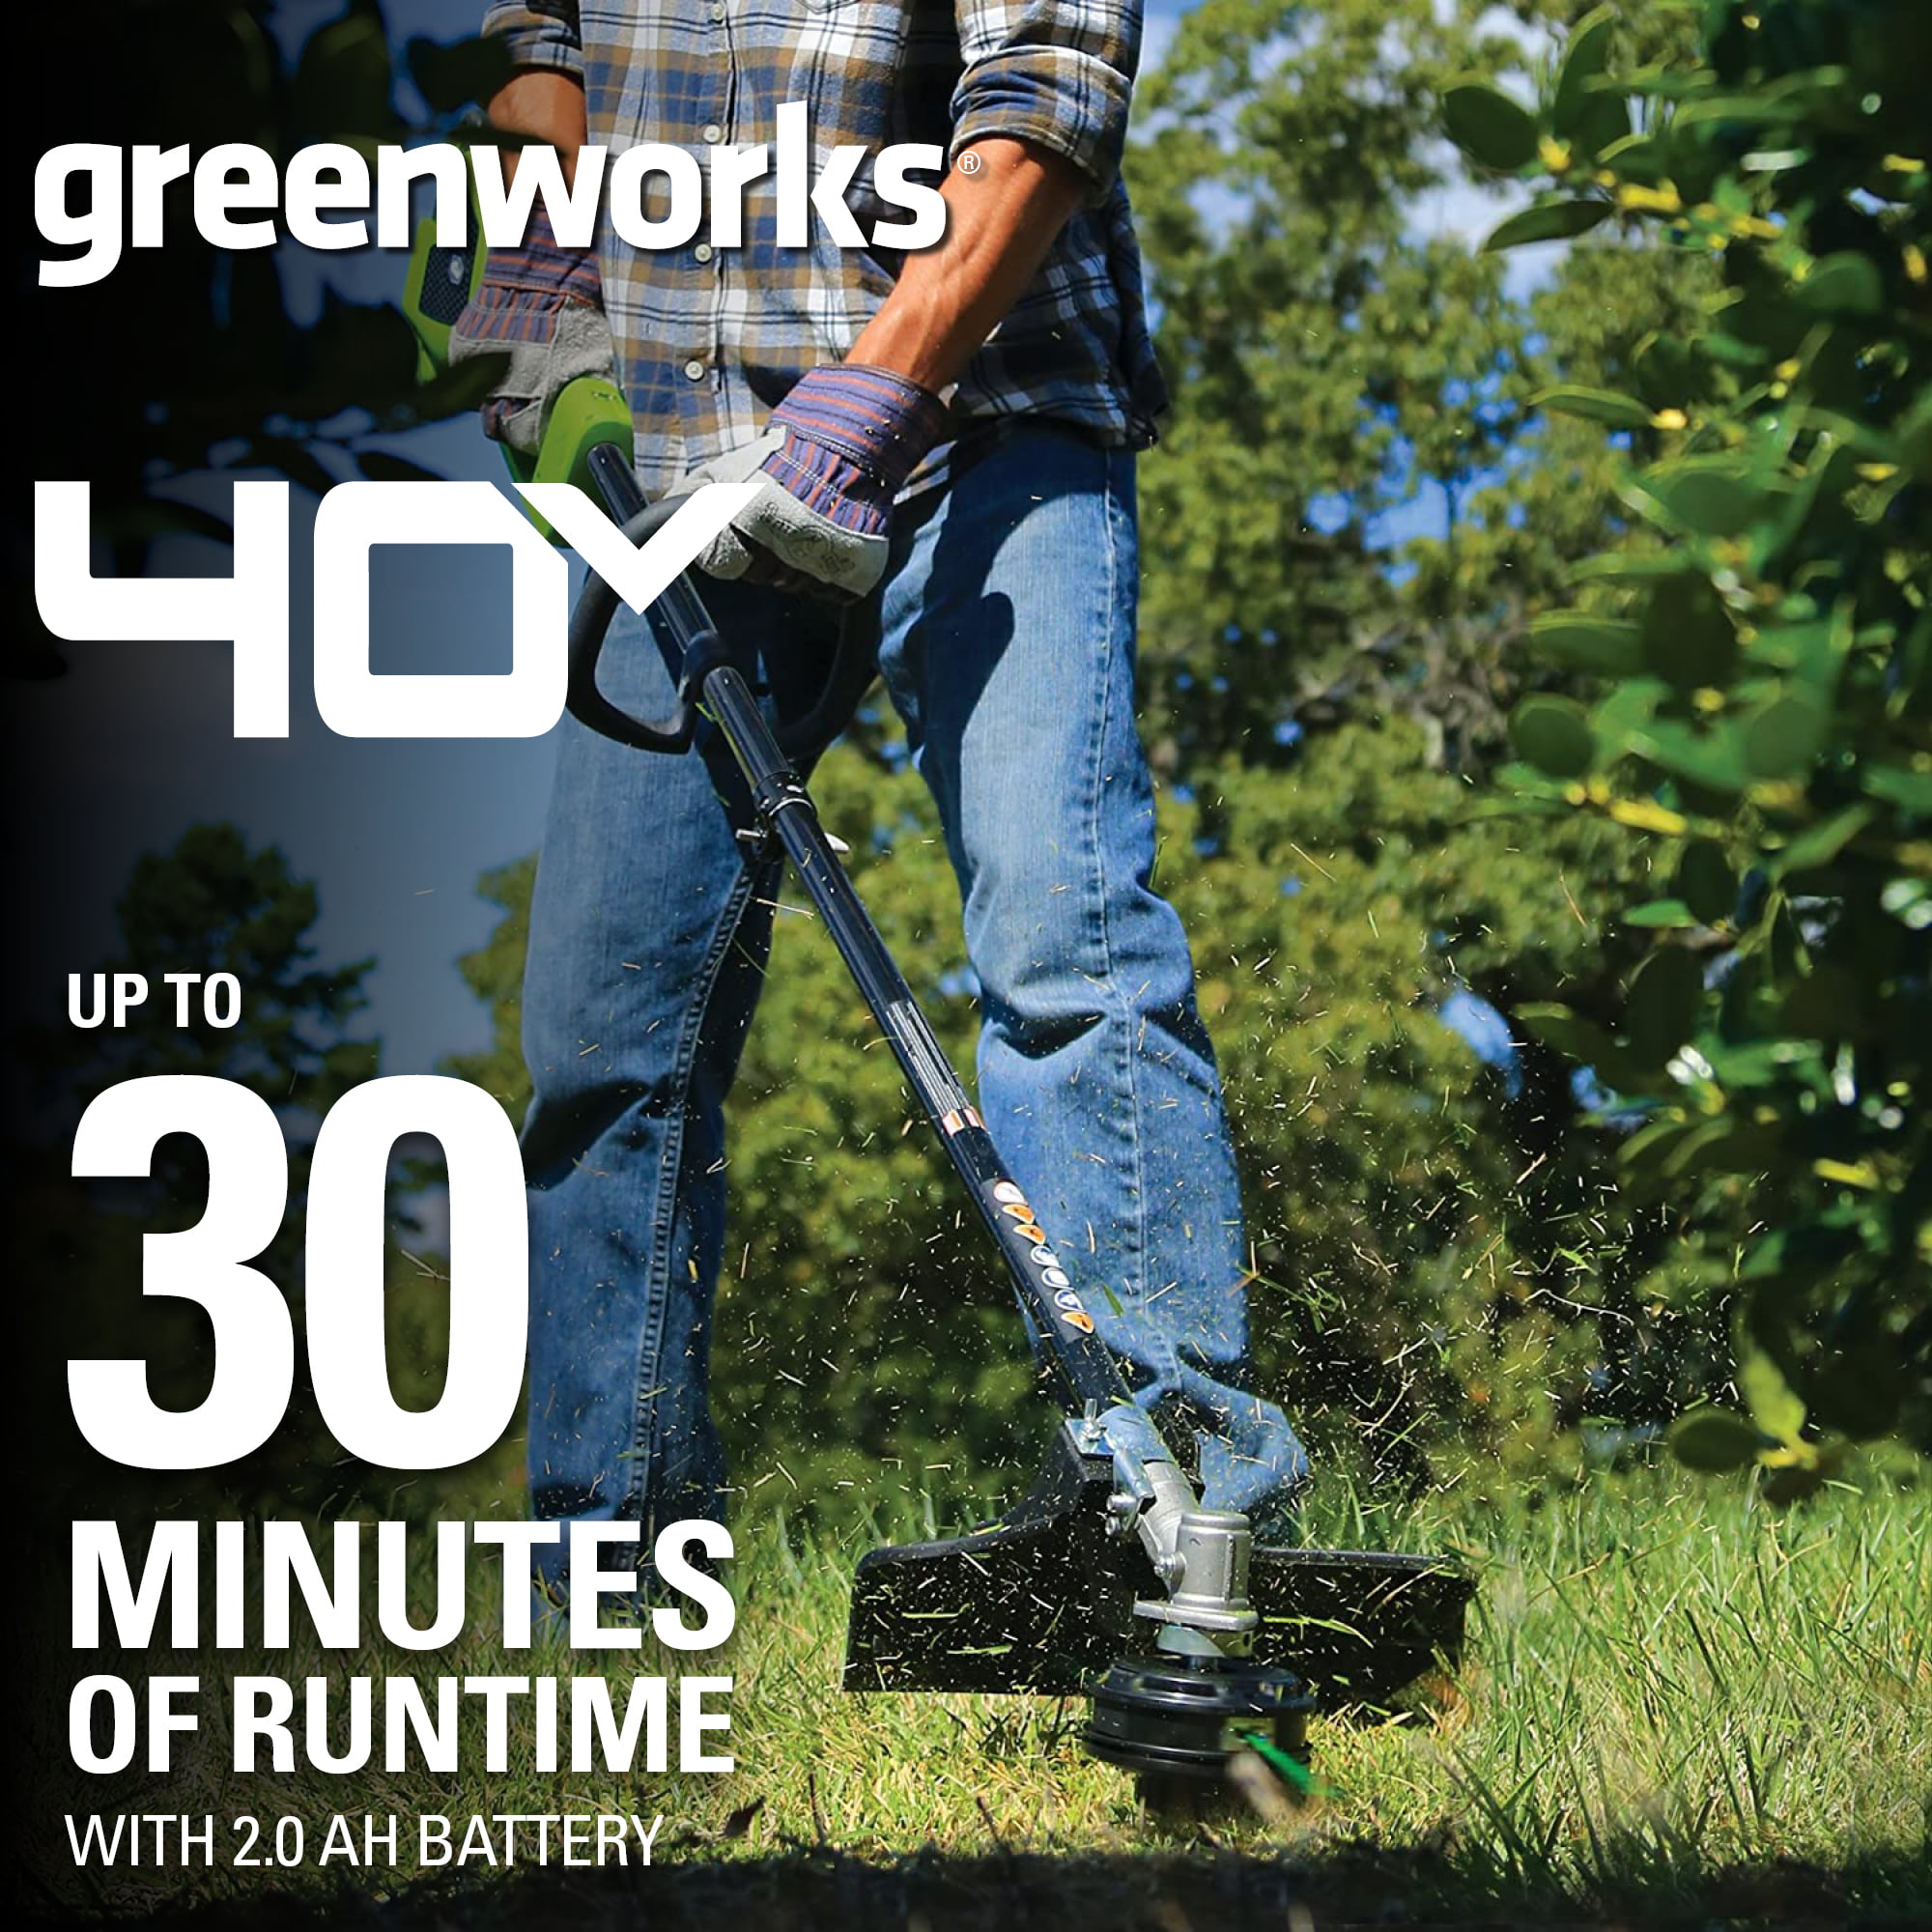 Attachment Capable 2.0 AH Battery Included 2100702 Greenworks 14-Inch 40V Cordless String Trimmer 